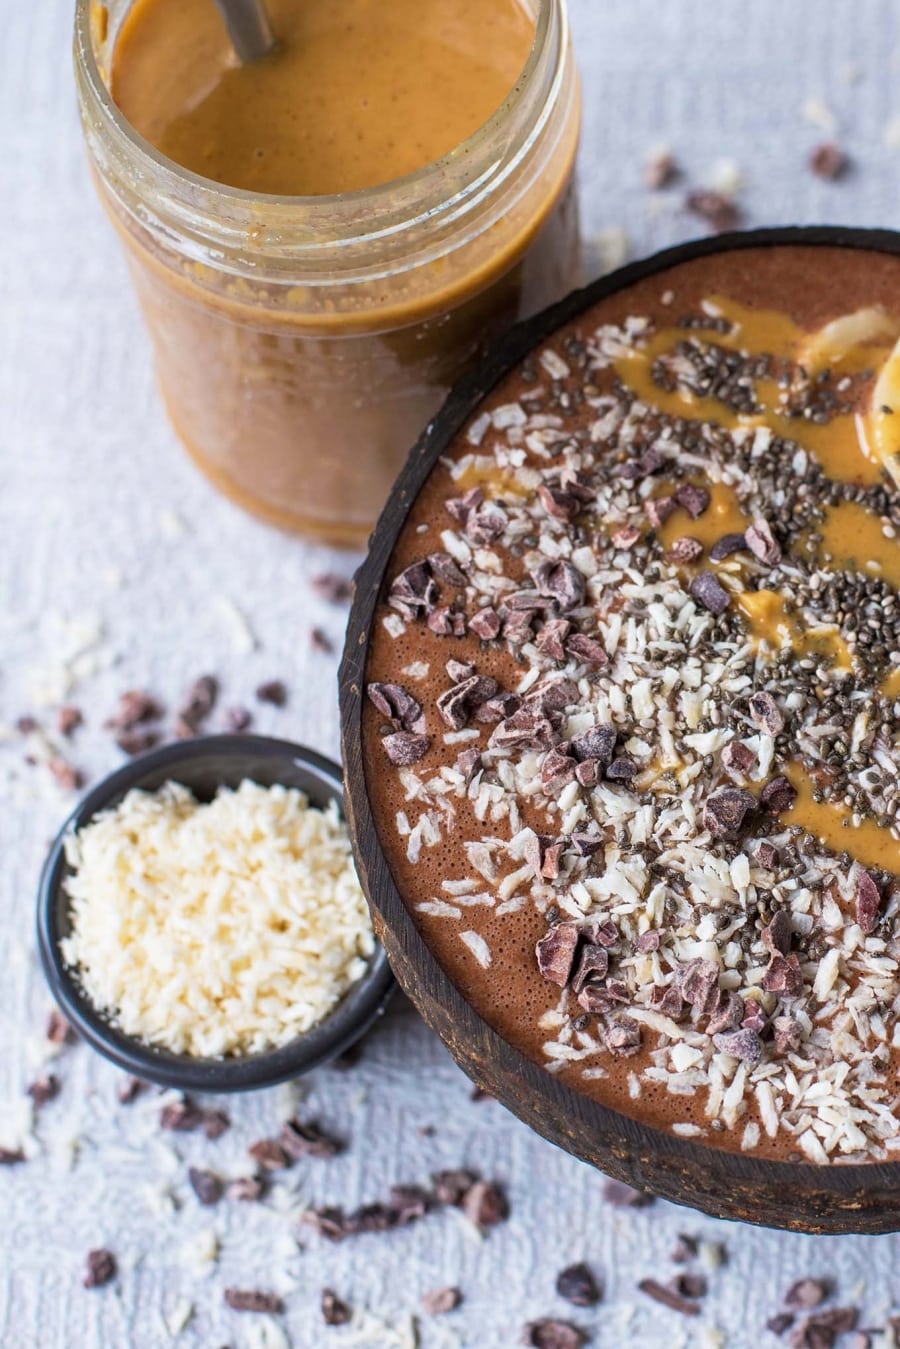 chocolate and coconut topped smoothie bowl and a jar of peanut butter.